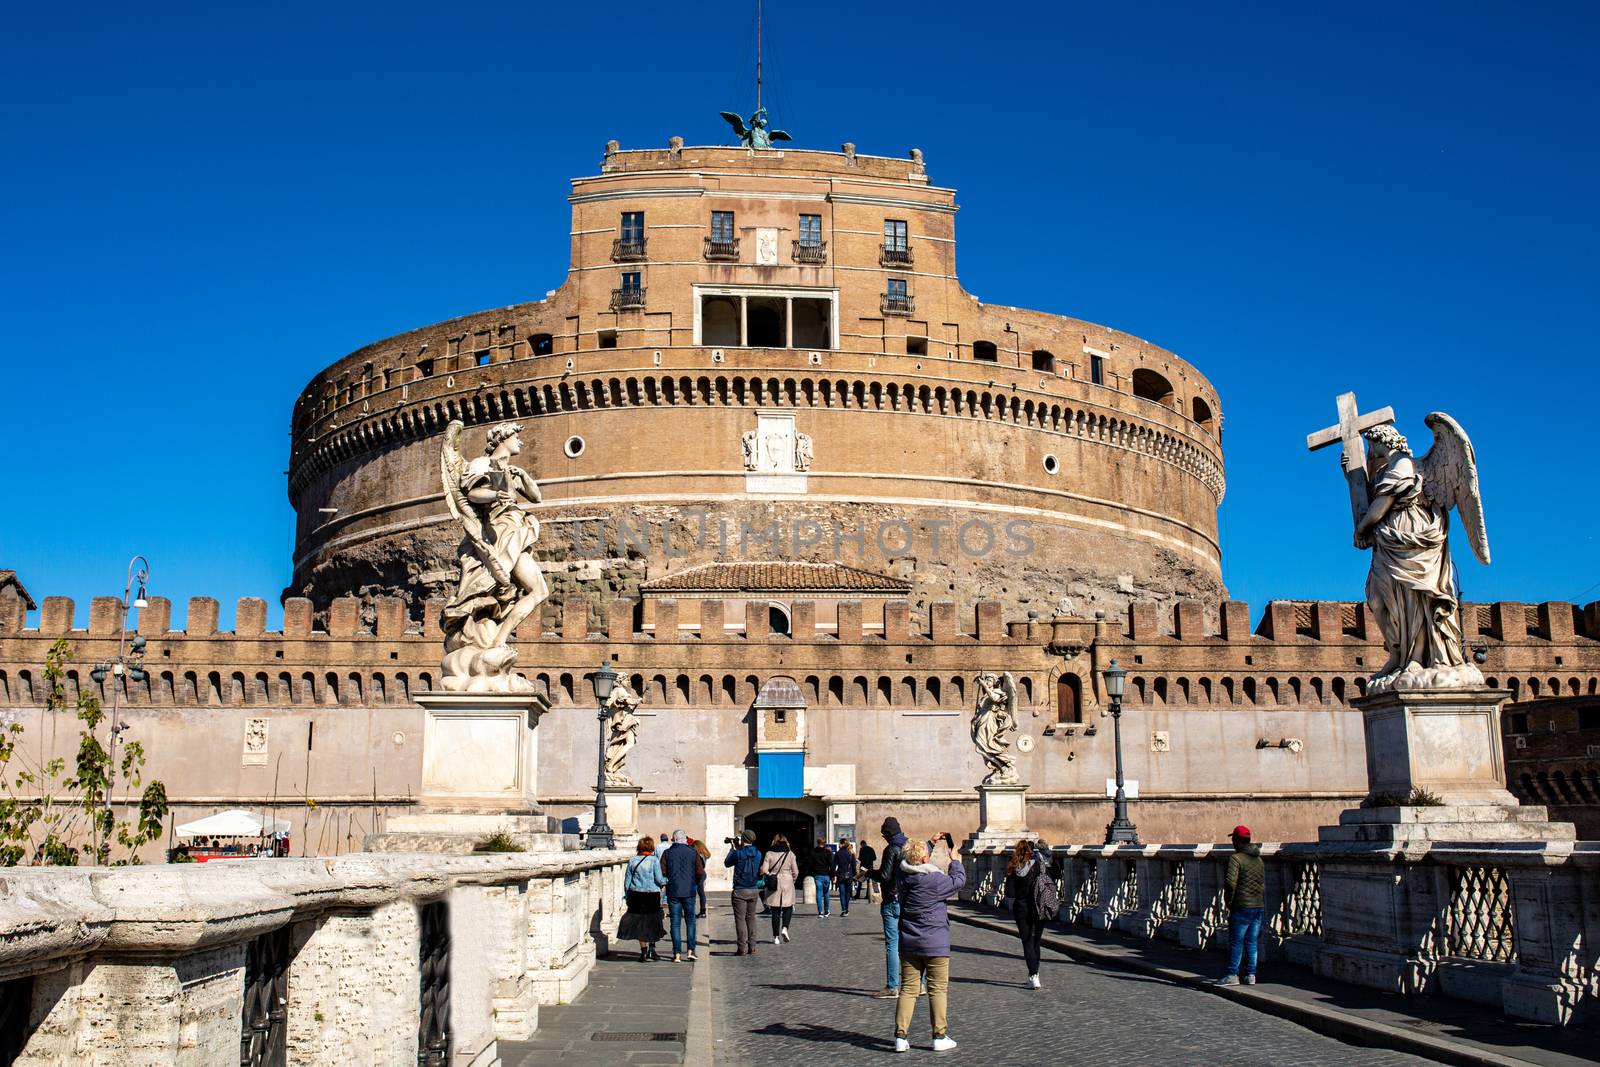 Frontal view of the Castel Sant'Angelo in Rome, Italy by 977_ReX_977